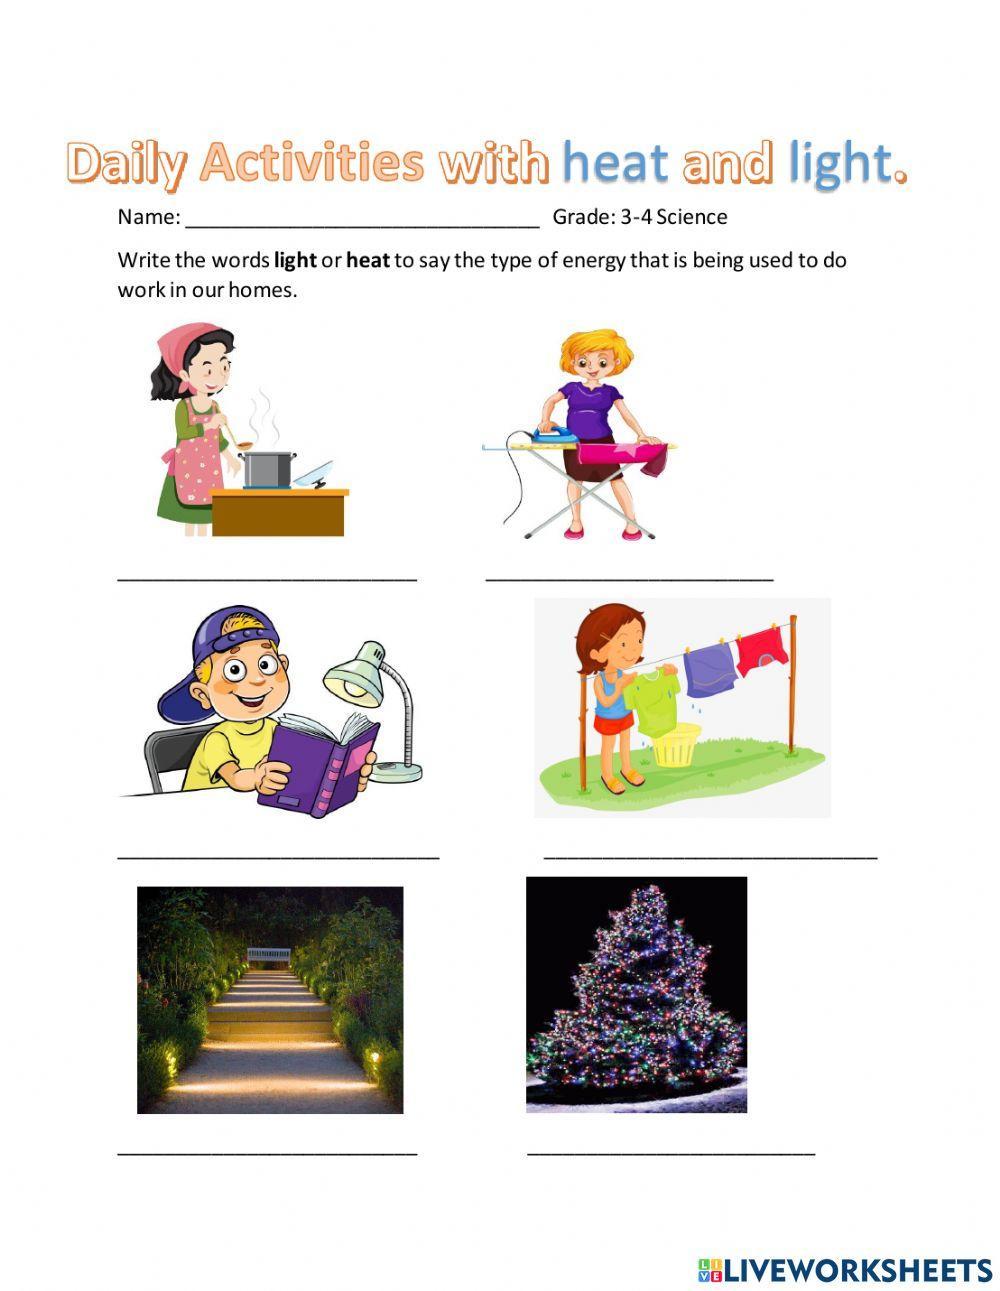 Using Heat and Light to do daily